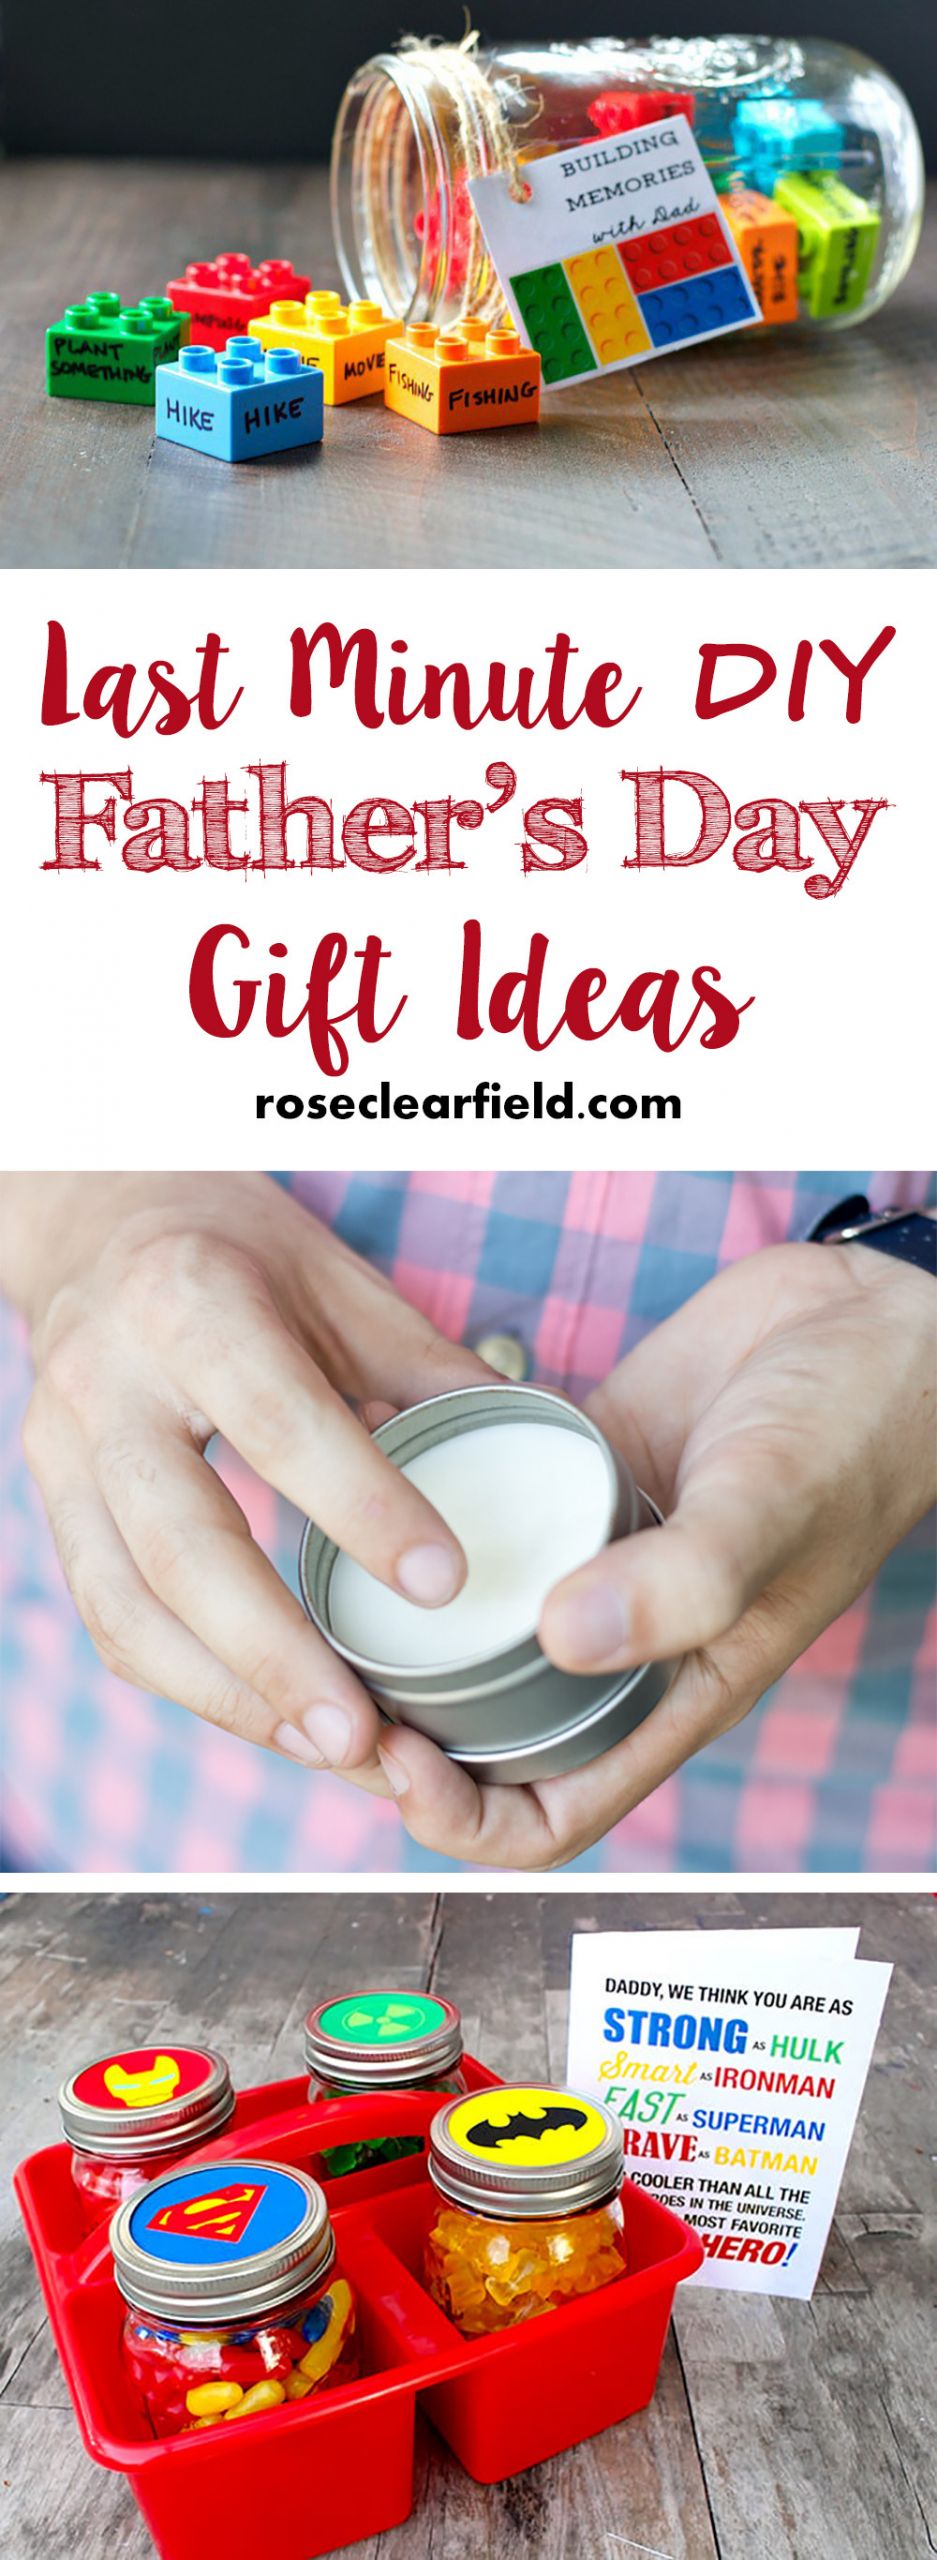 Diy Fathers Day Gift
 Last Minute DIY Father s Day Gift Ideas • Rose Clearfield